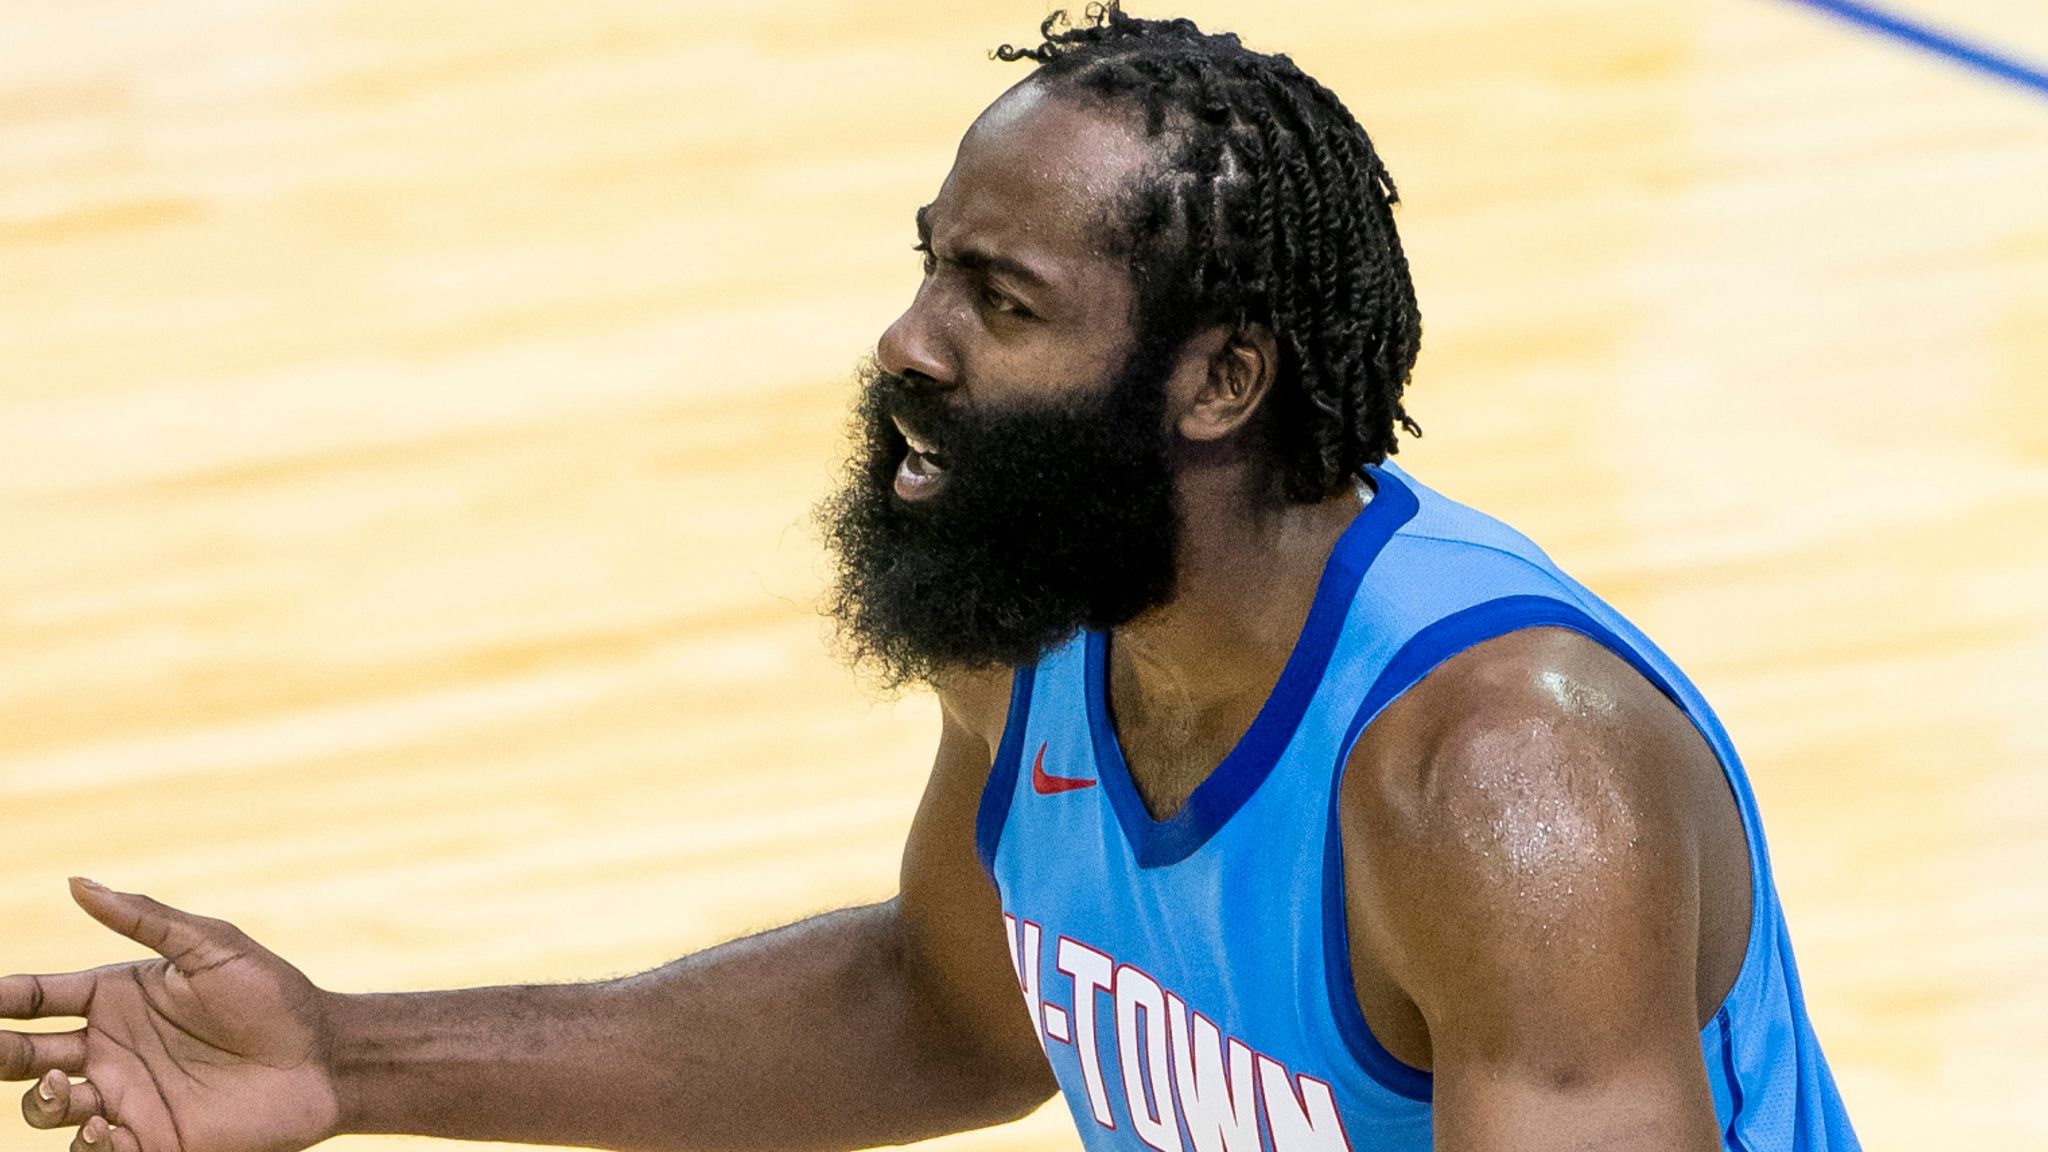 How to buy a James Harden Brooklyn Nets jersey after Rockets trade